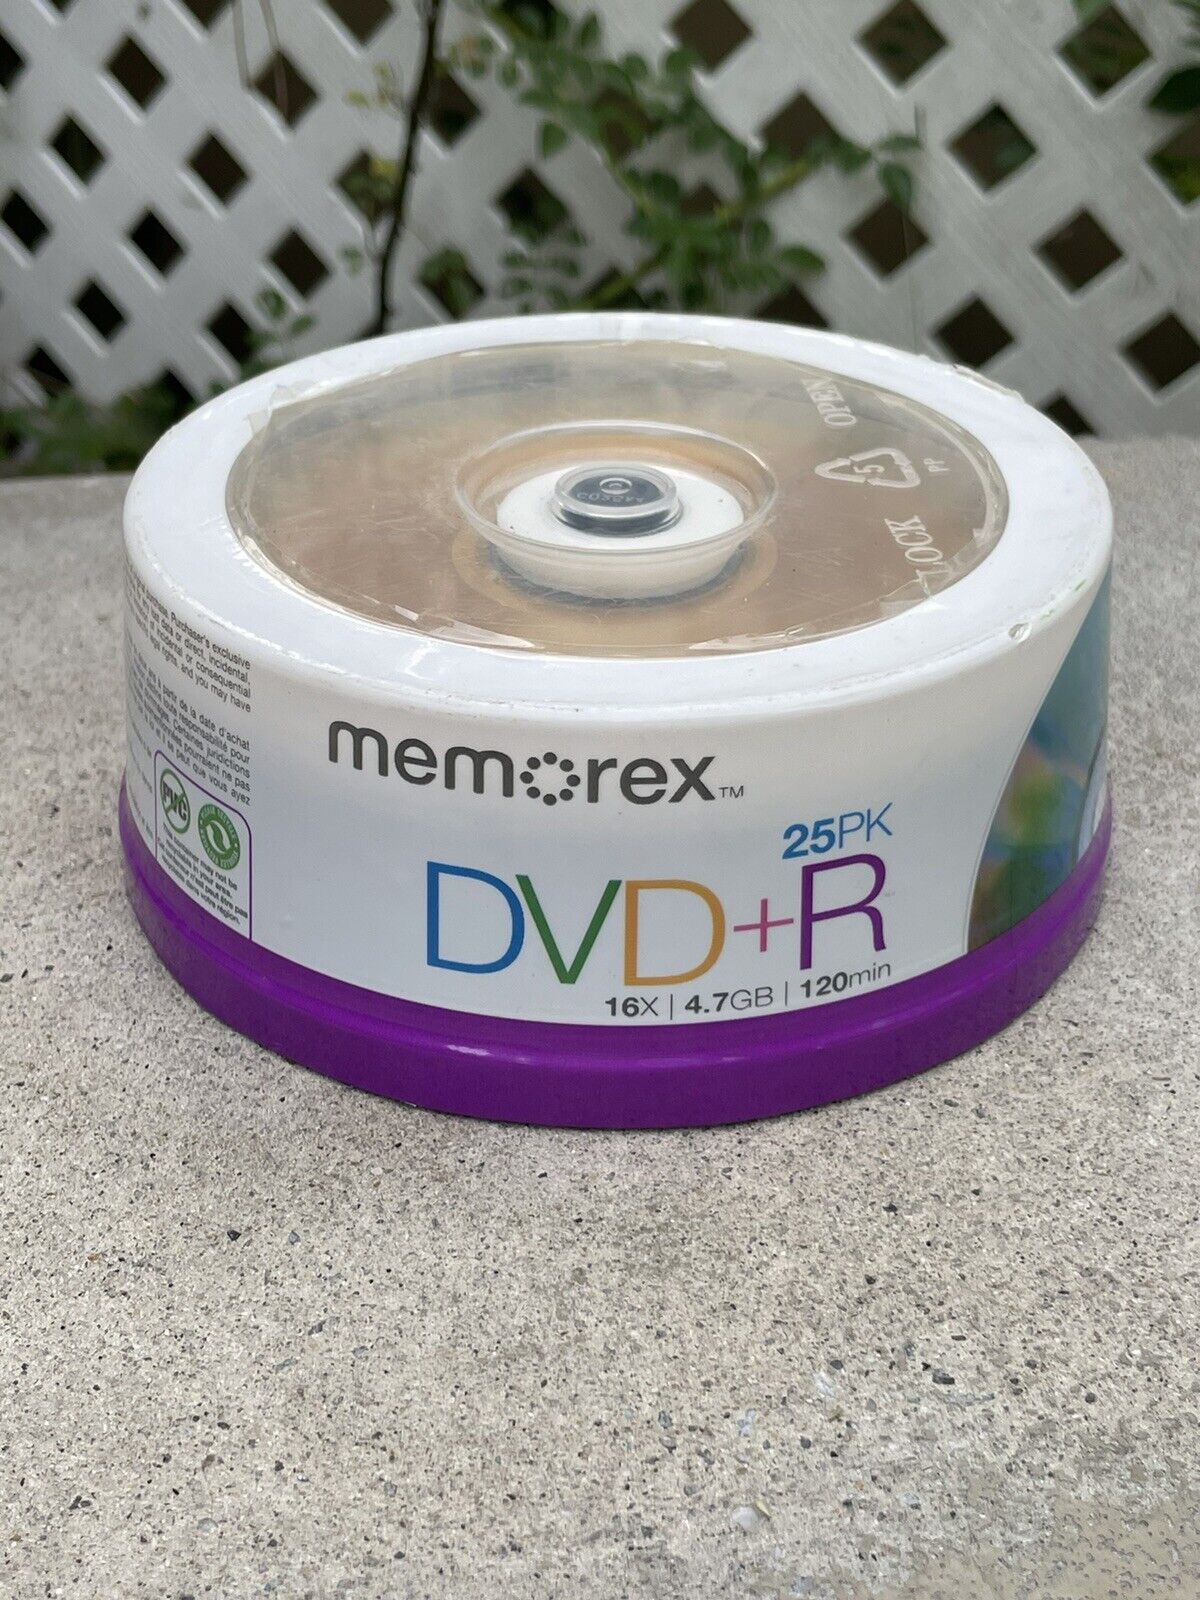 Memorex DVD+R Cool Colors 16X 4.7 GB 120 Min Disc 25 Pack Blank DVD New Sealed